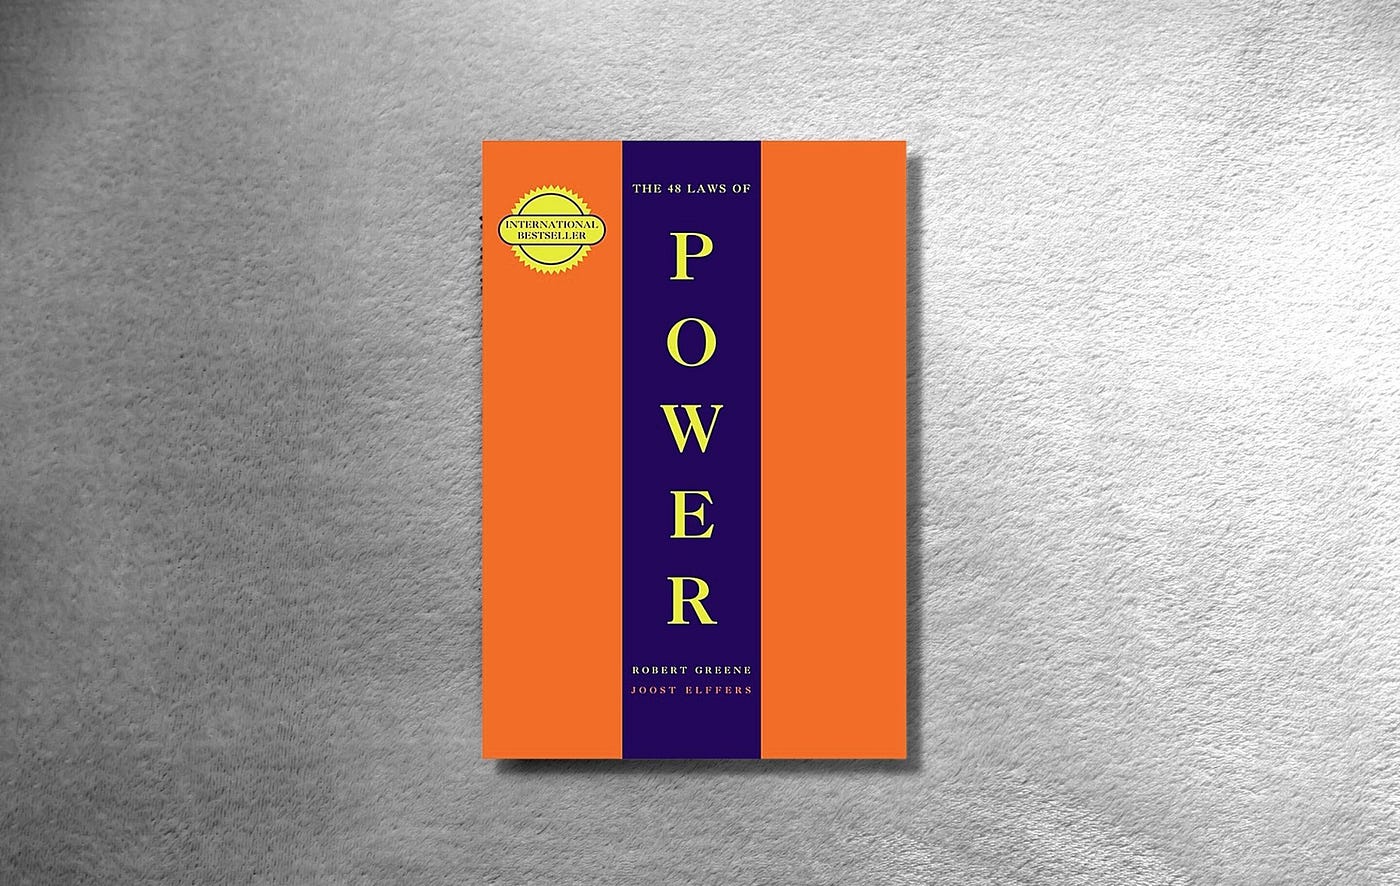 5 Invaluable Lessons From the Book “48 Laws of Power.”, by Noorain Ali